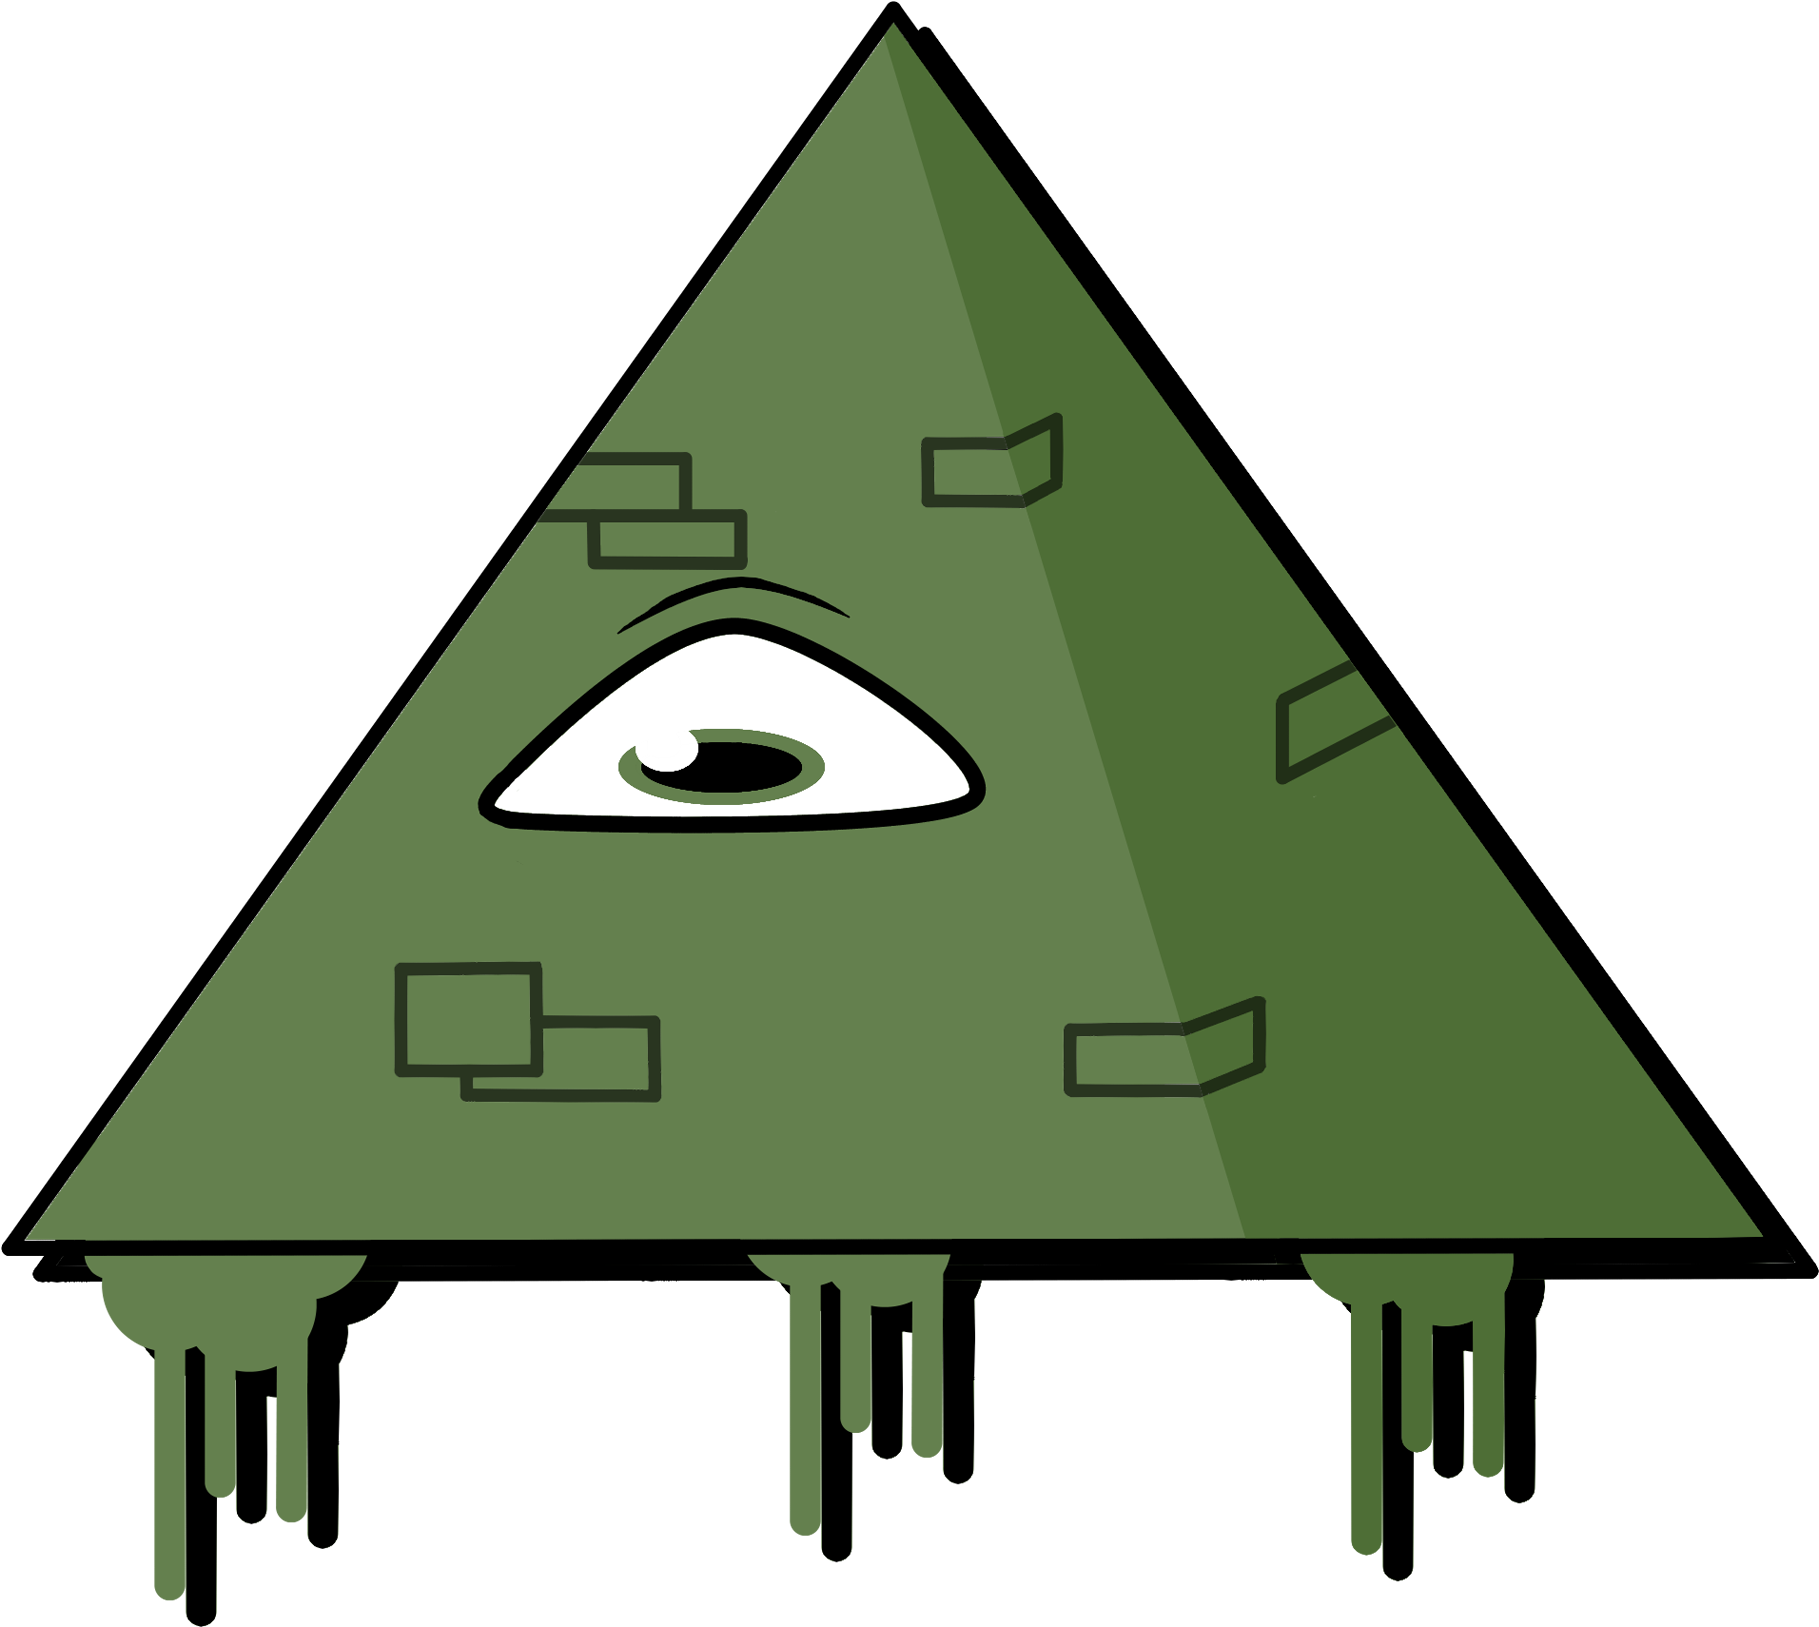 Green Triangle With Eye Illustration PNG